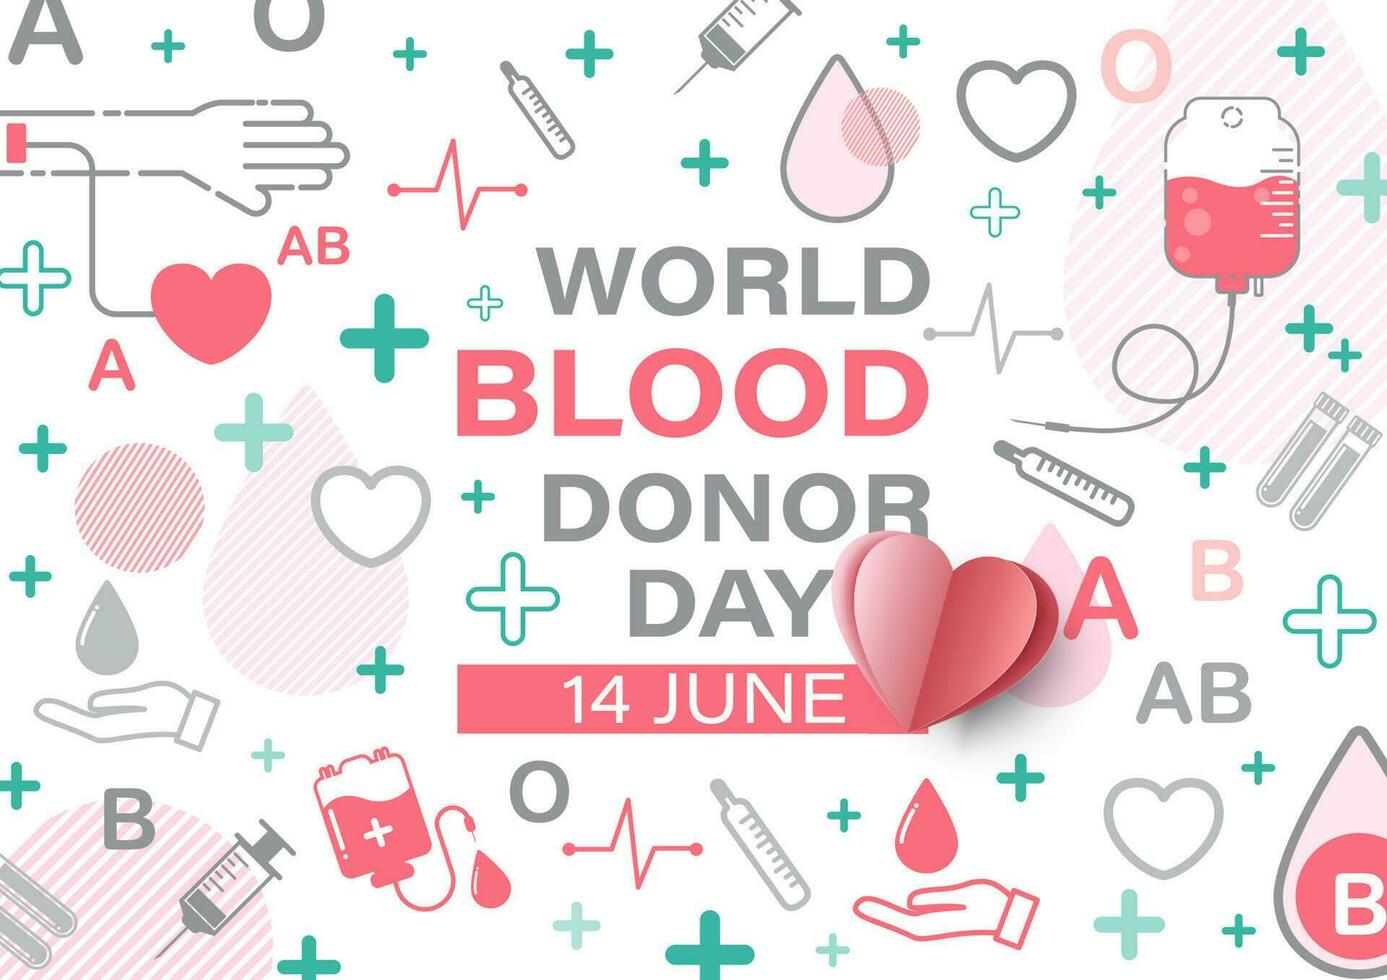 Medical and blood donation icon with wording of World blood donor day on white background. Poster campaign in icon flat style and vector design.